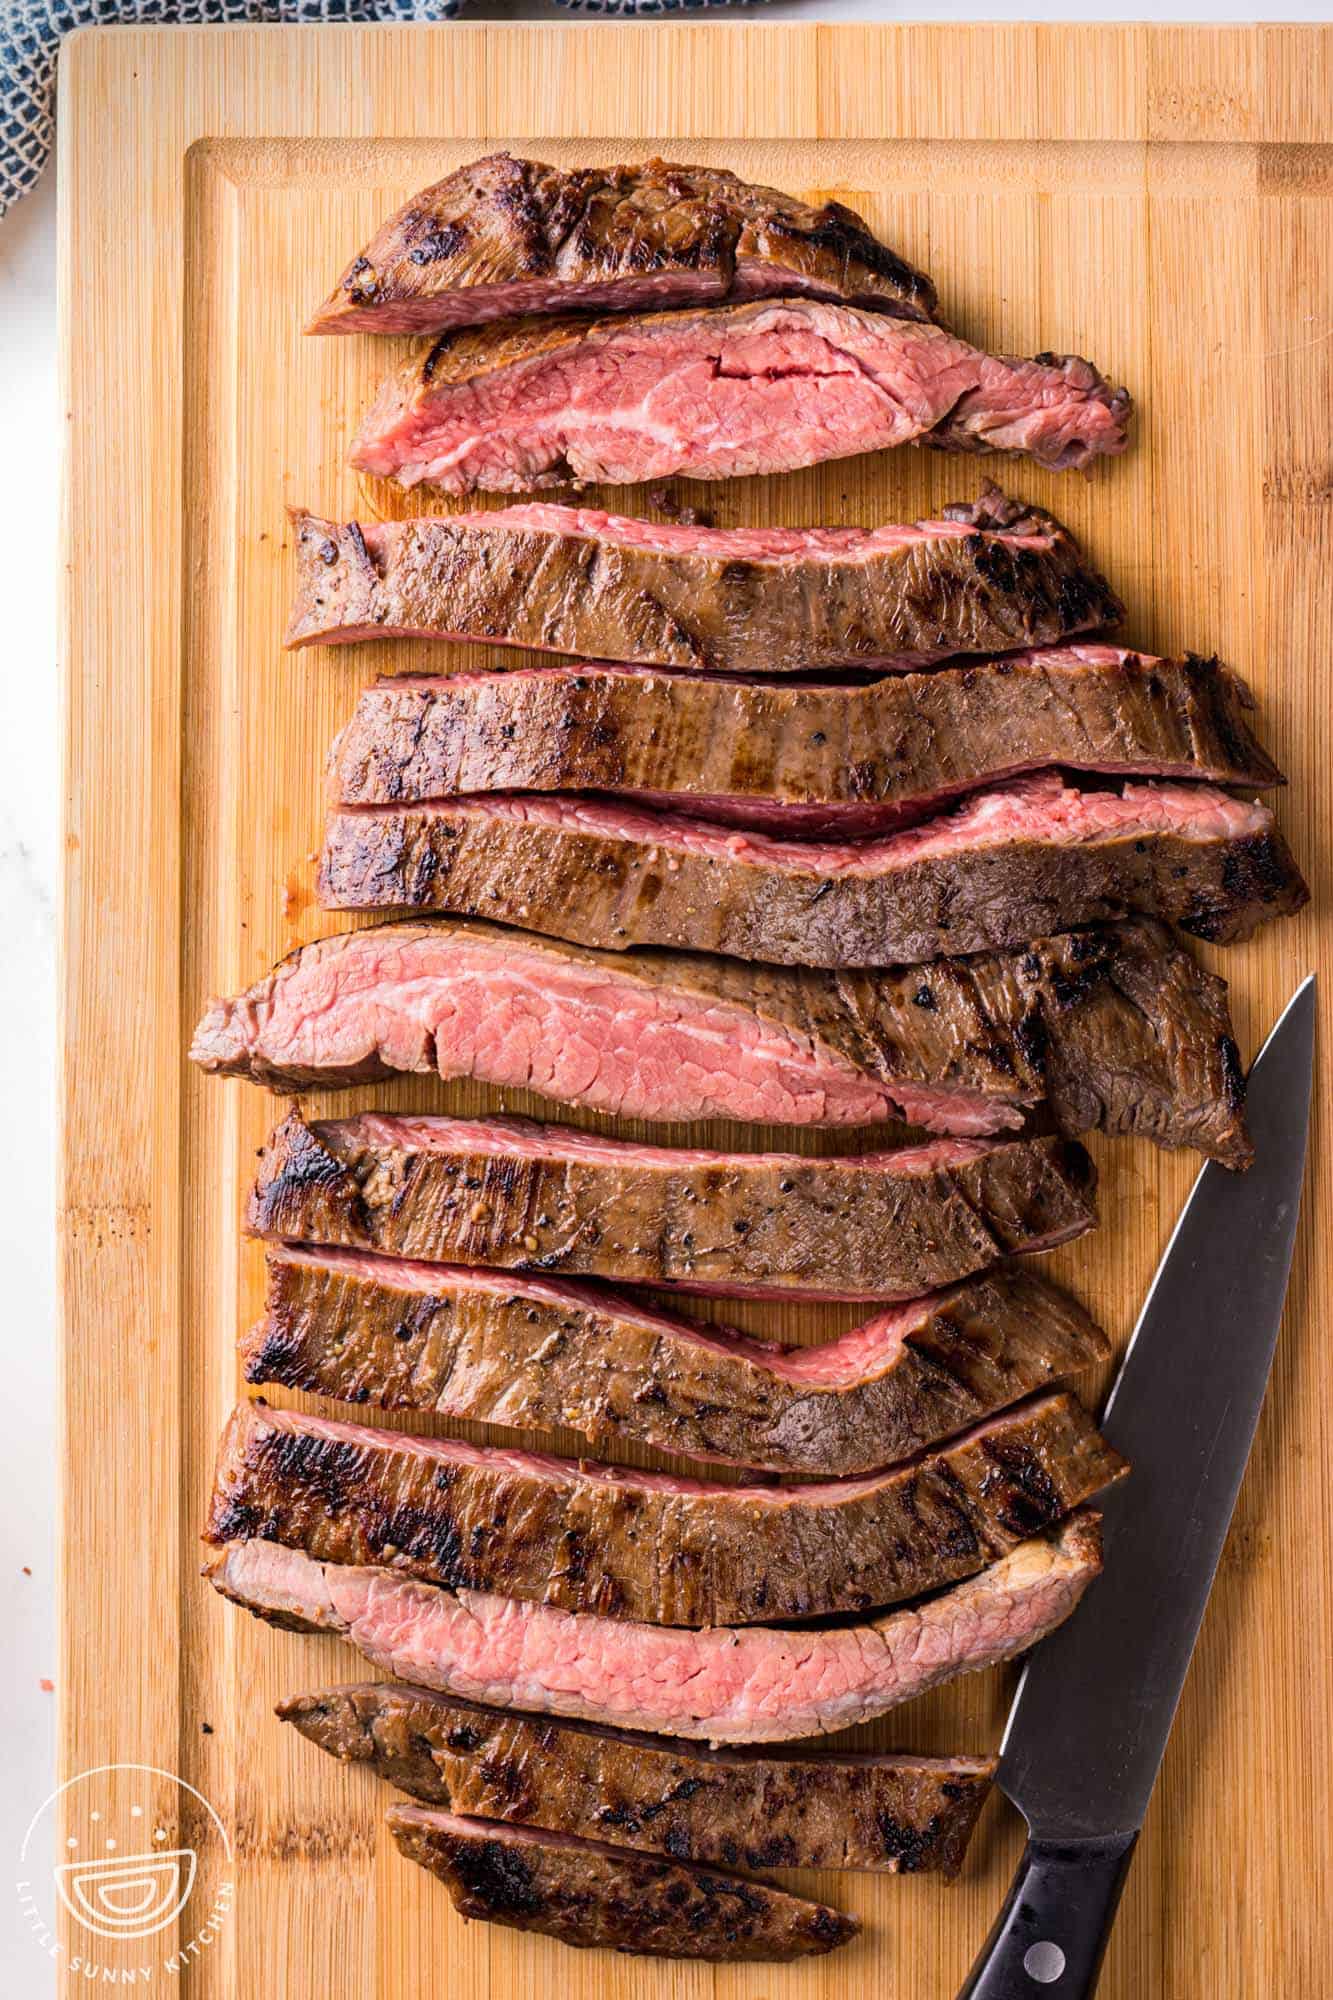 Sliced flank steak on a wooden cutting board and a knife